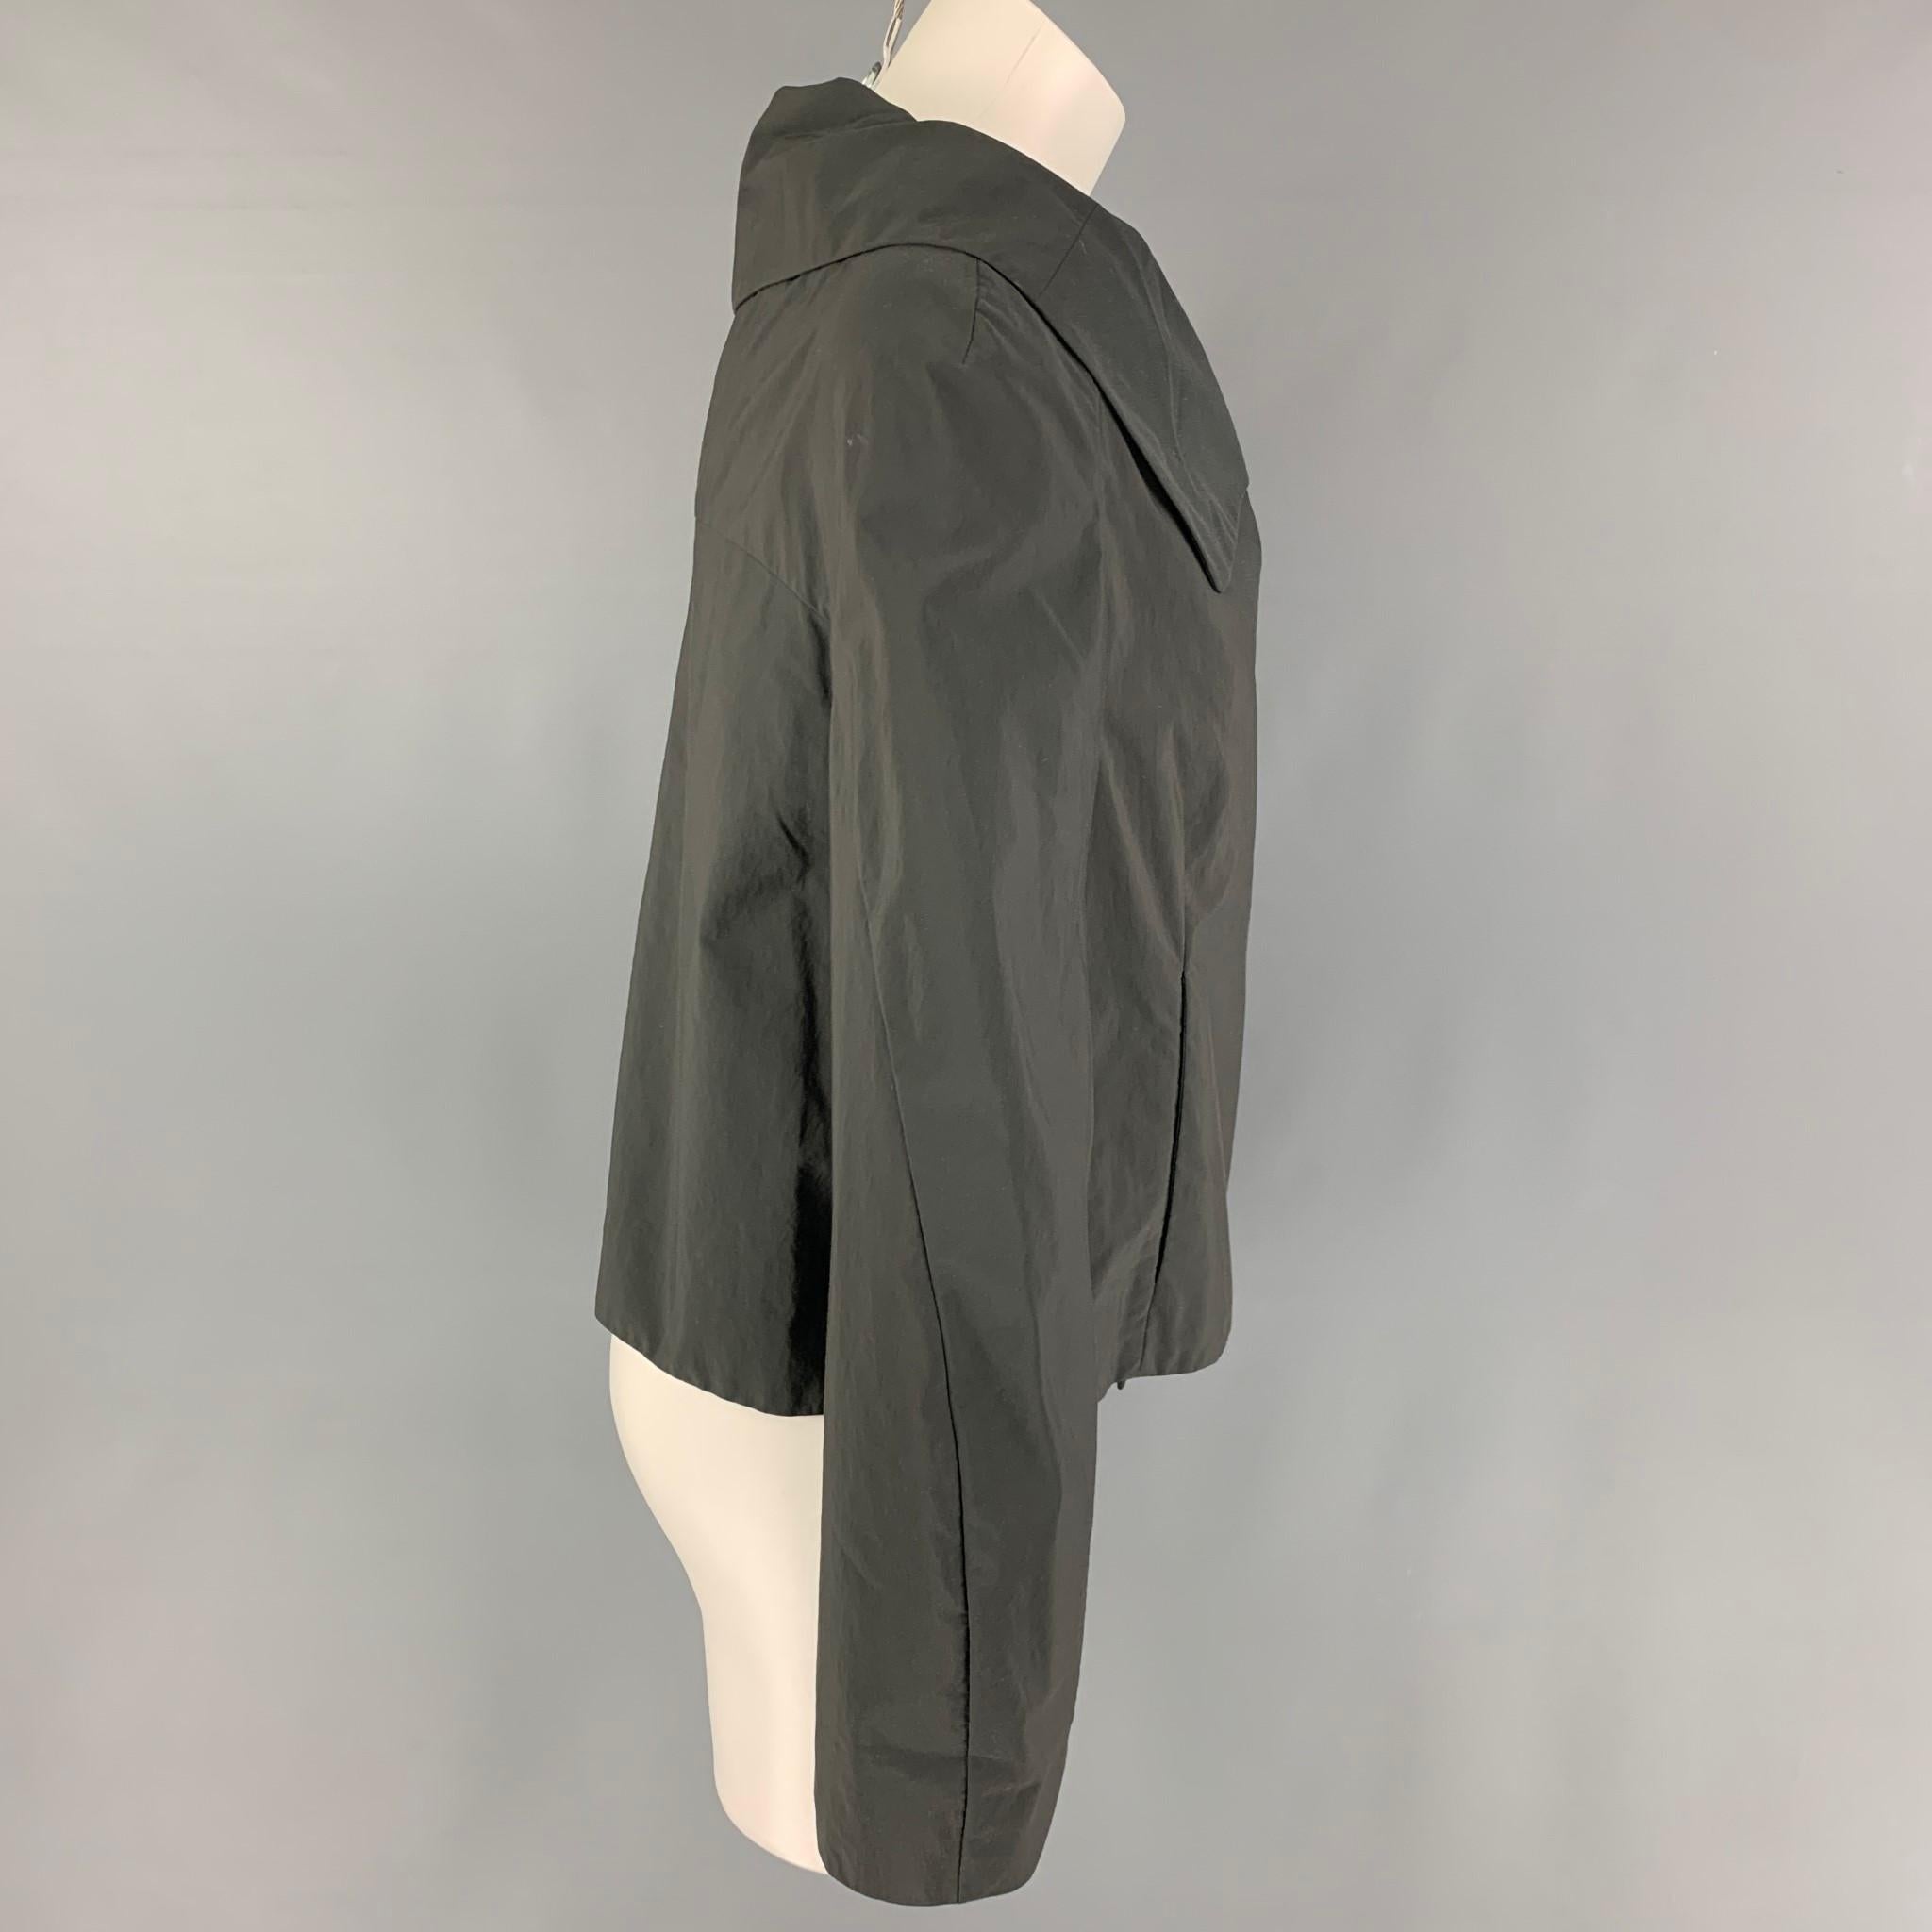 MARNI jacket comes in a slate cotton / nylon featuring a large collar, slit pockets, and a double breasted snap button closure. Made in Italy. 

Very Good Pre-Owned Condition.
Marked: 38

Measurements:

Shoulder: 16 in.
Bust: 37 in.
Sleeve: 25